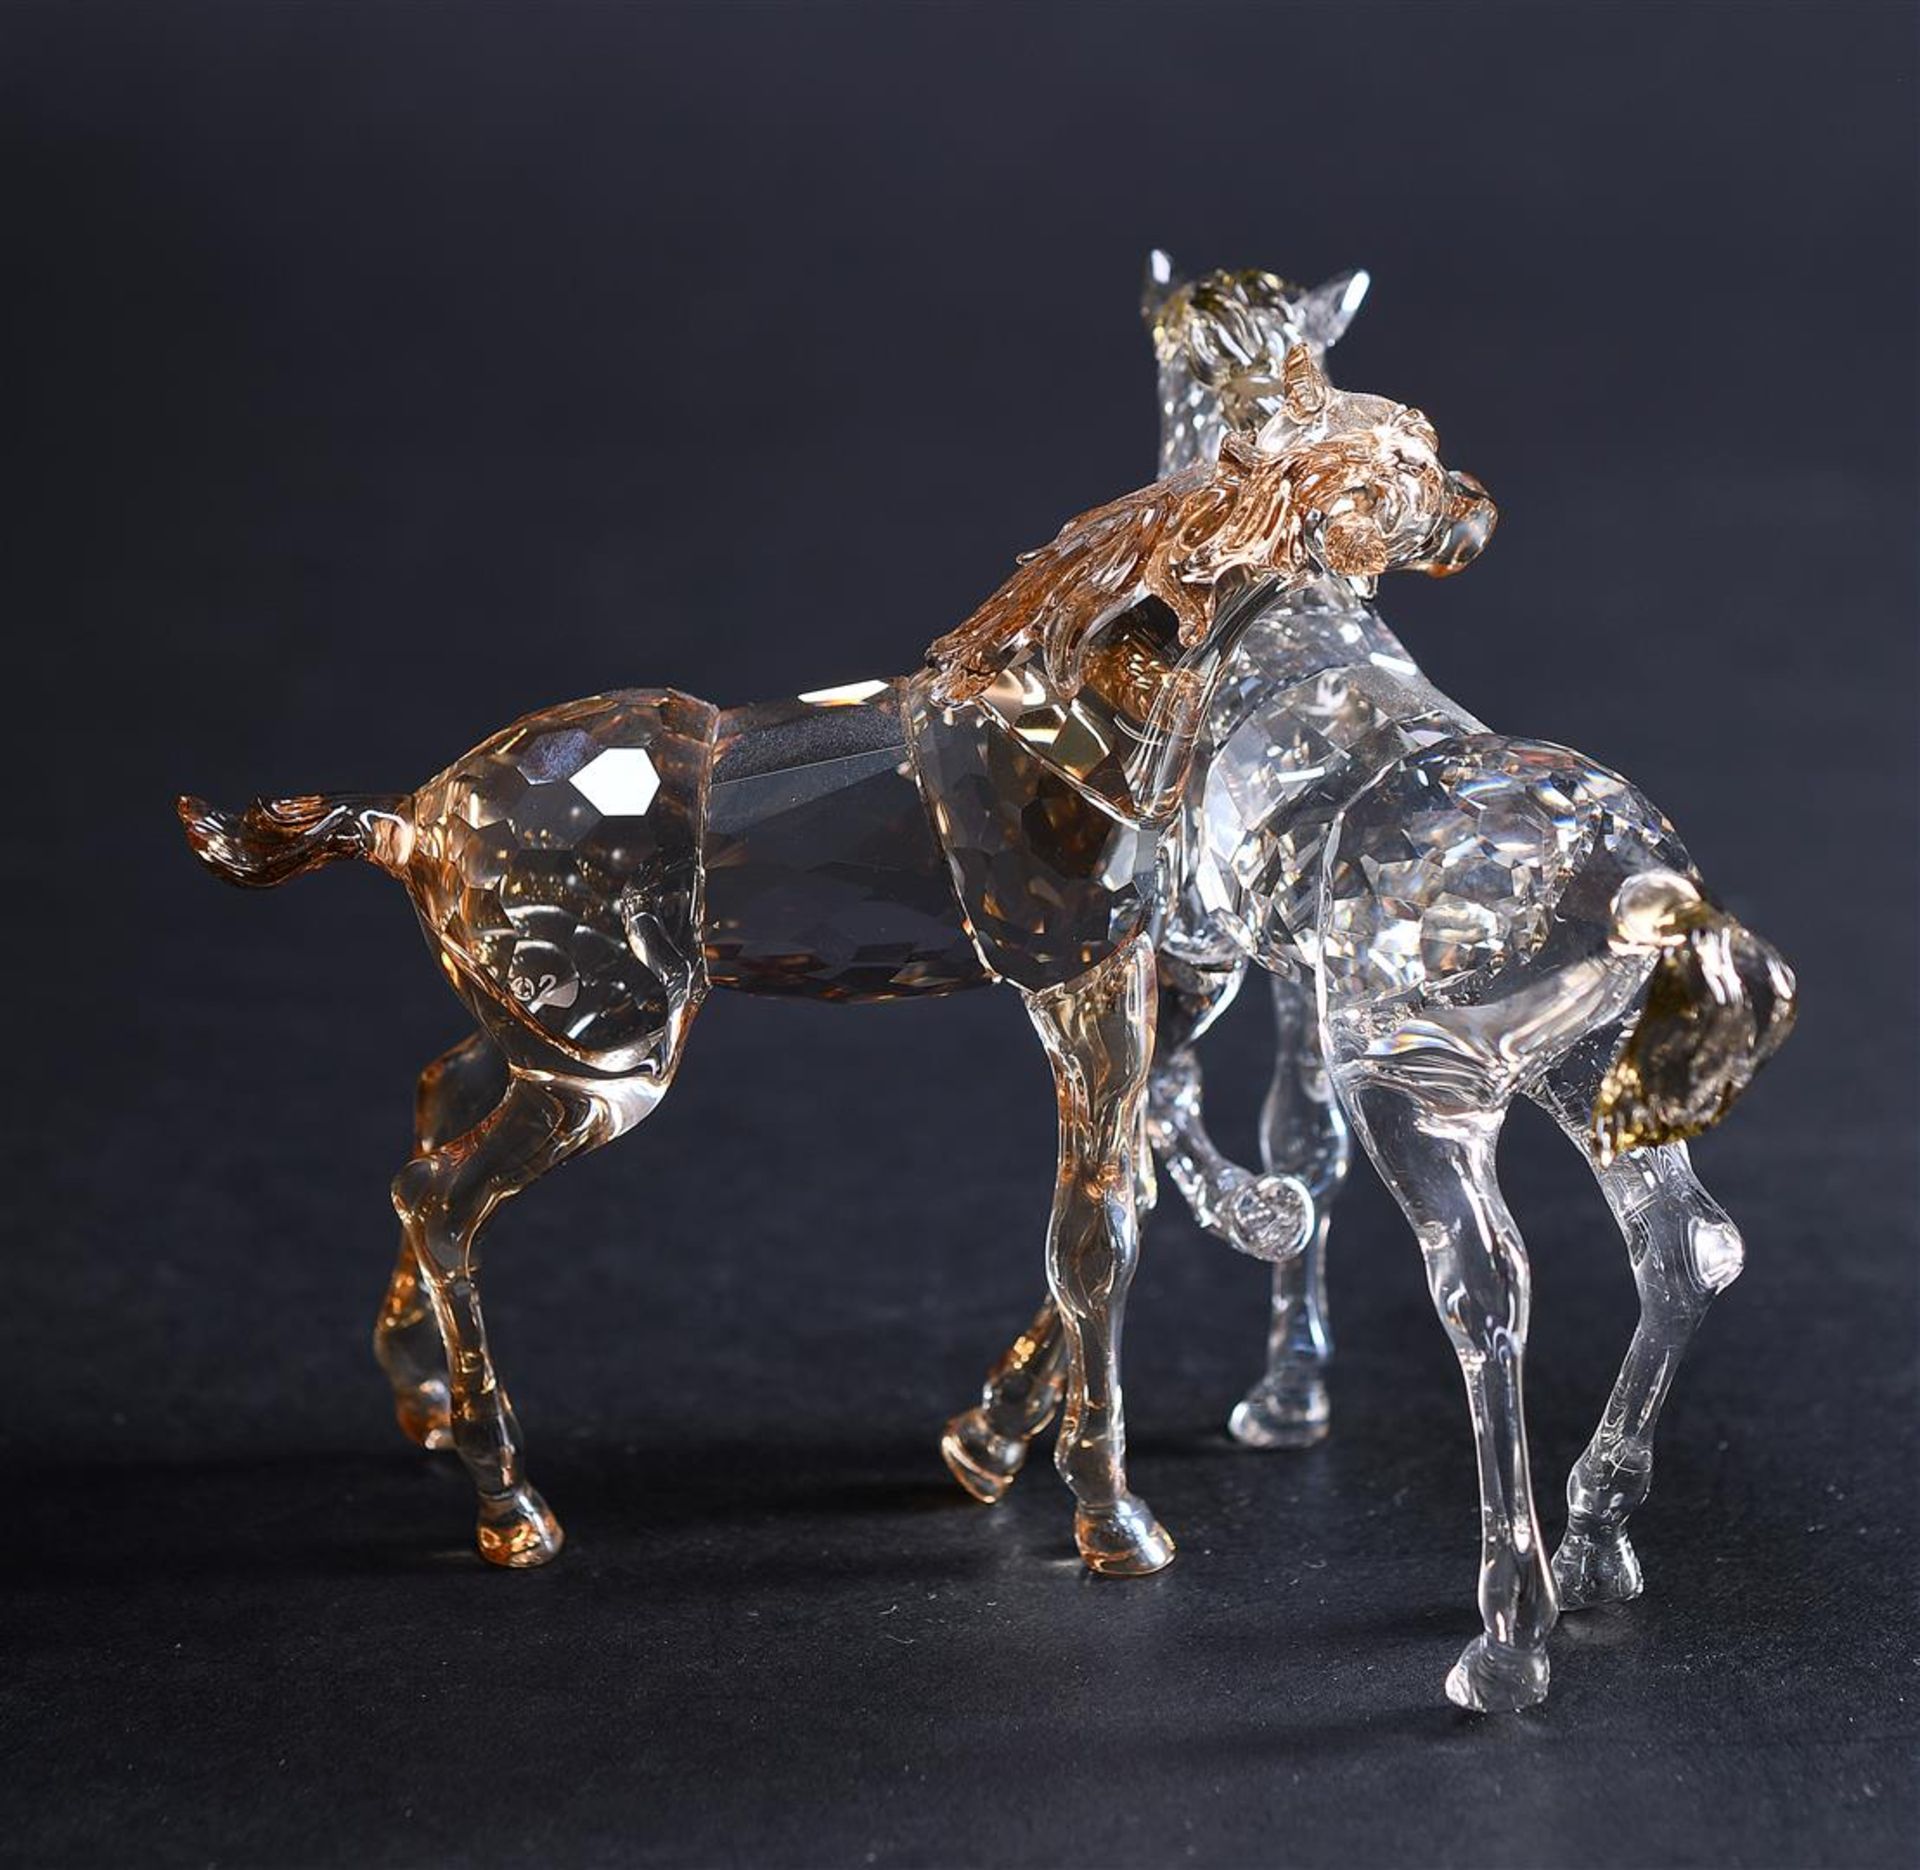 Swarovski, Foals, Year of issue 2012,1121627. Includes original box.
11,9 x 9,2 cm. - Image 4 of 8